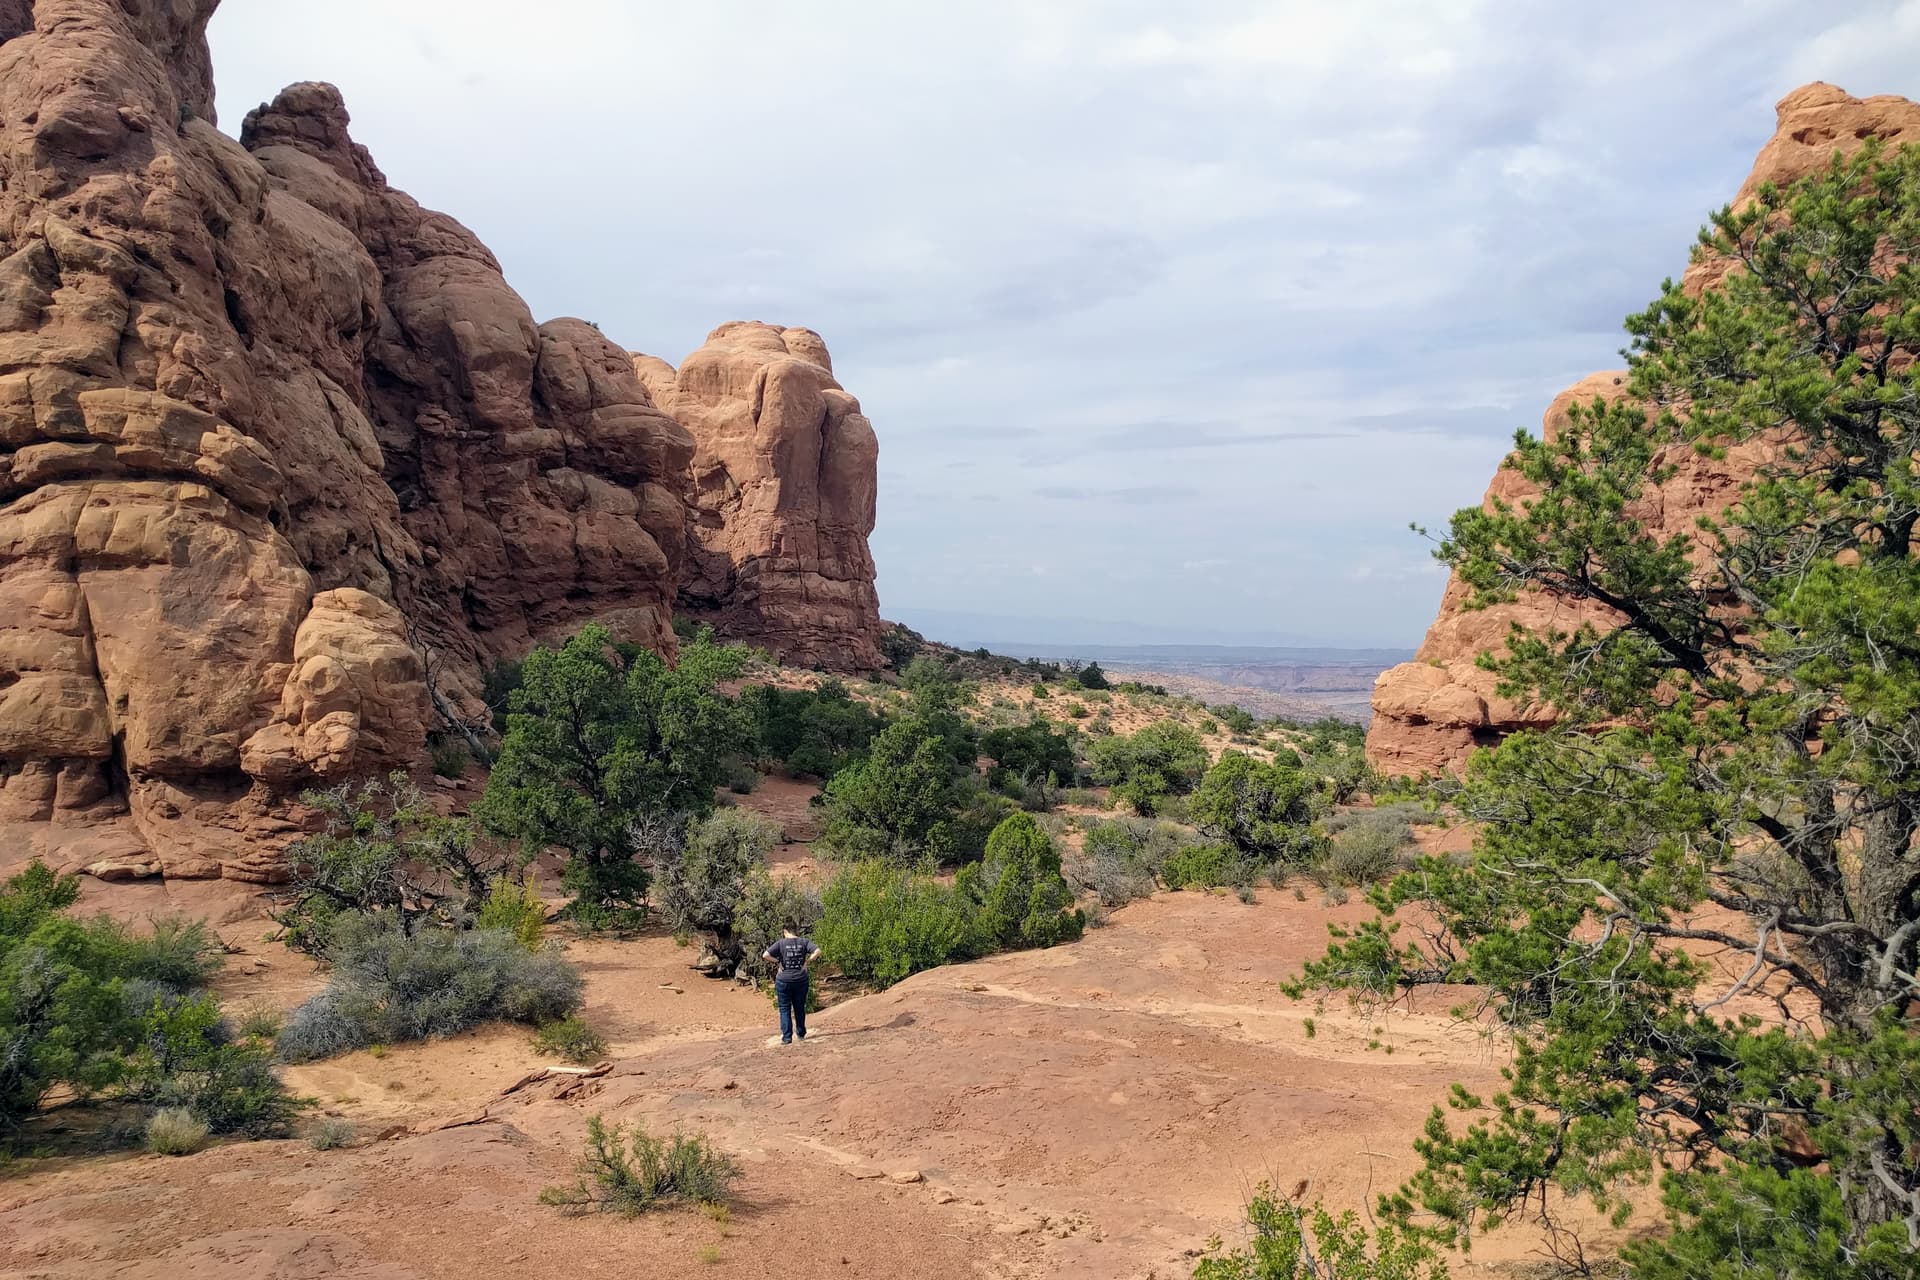 Len, in a gray shirt, stands far down a trail of red sandstone, her hands on her hips. Walls of red rock stand to her left and right, and a small grove of juniper trees is in front of her.